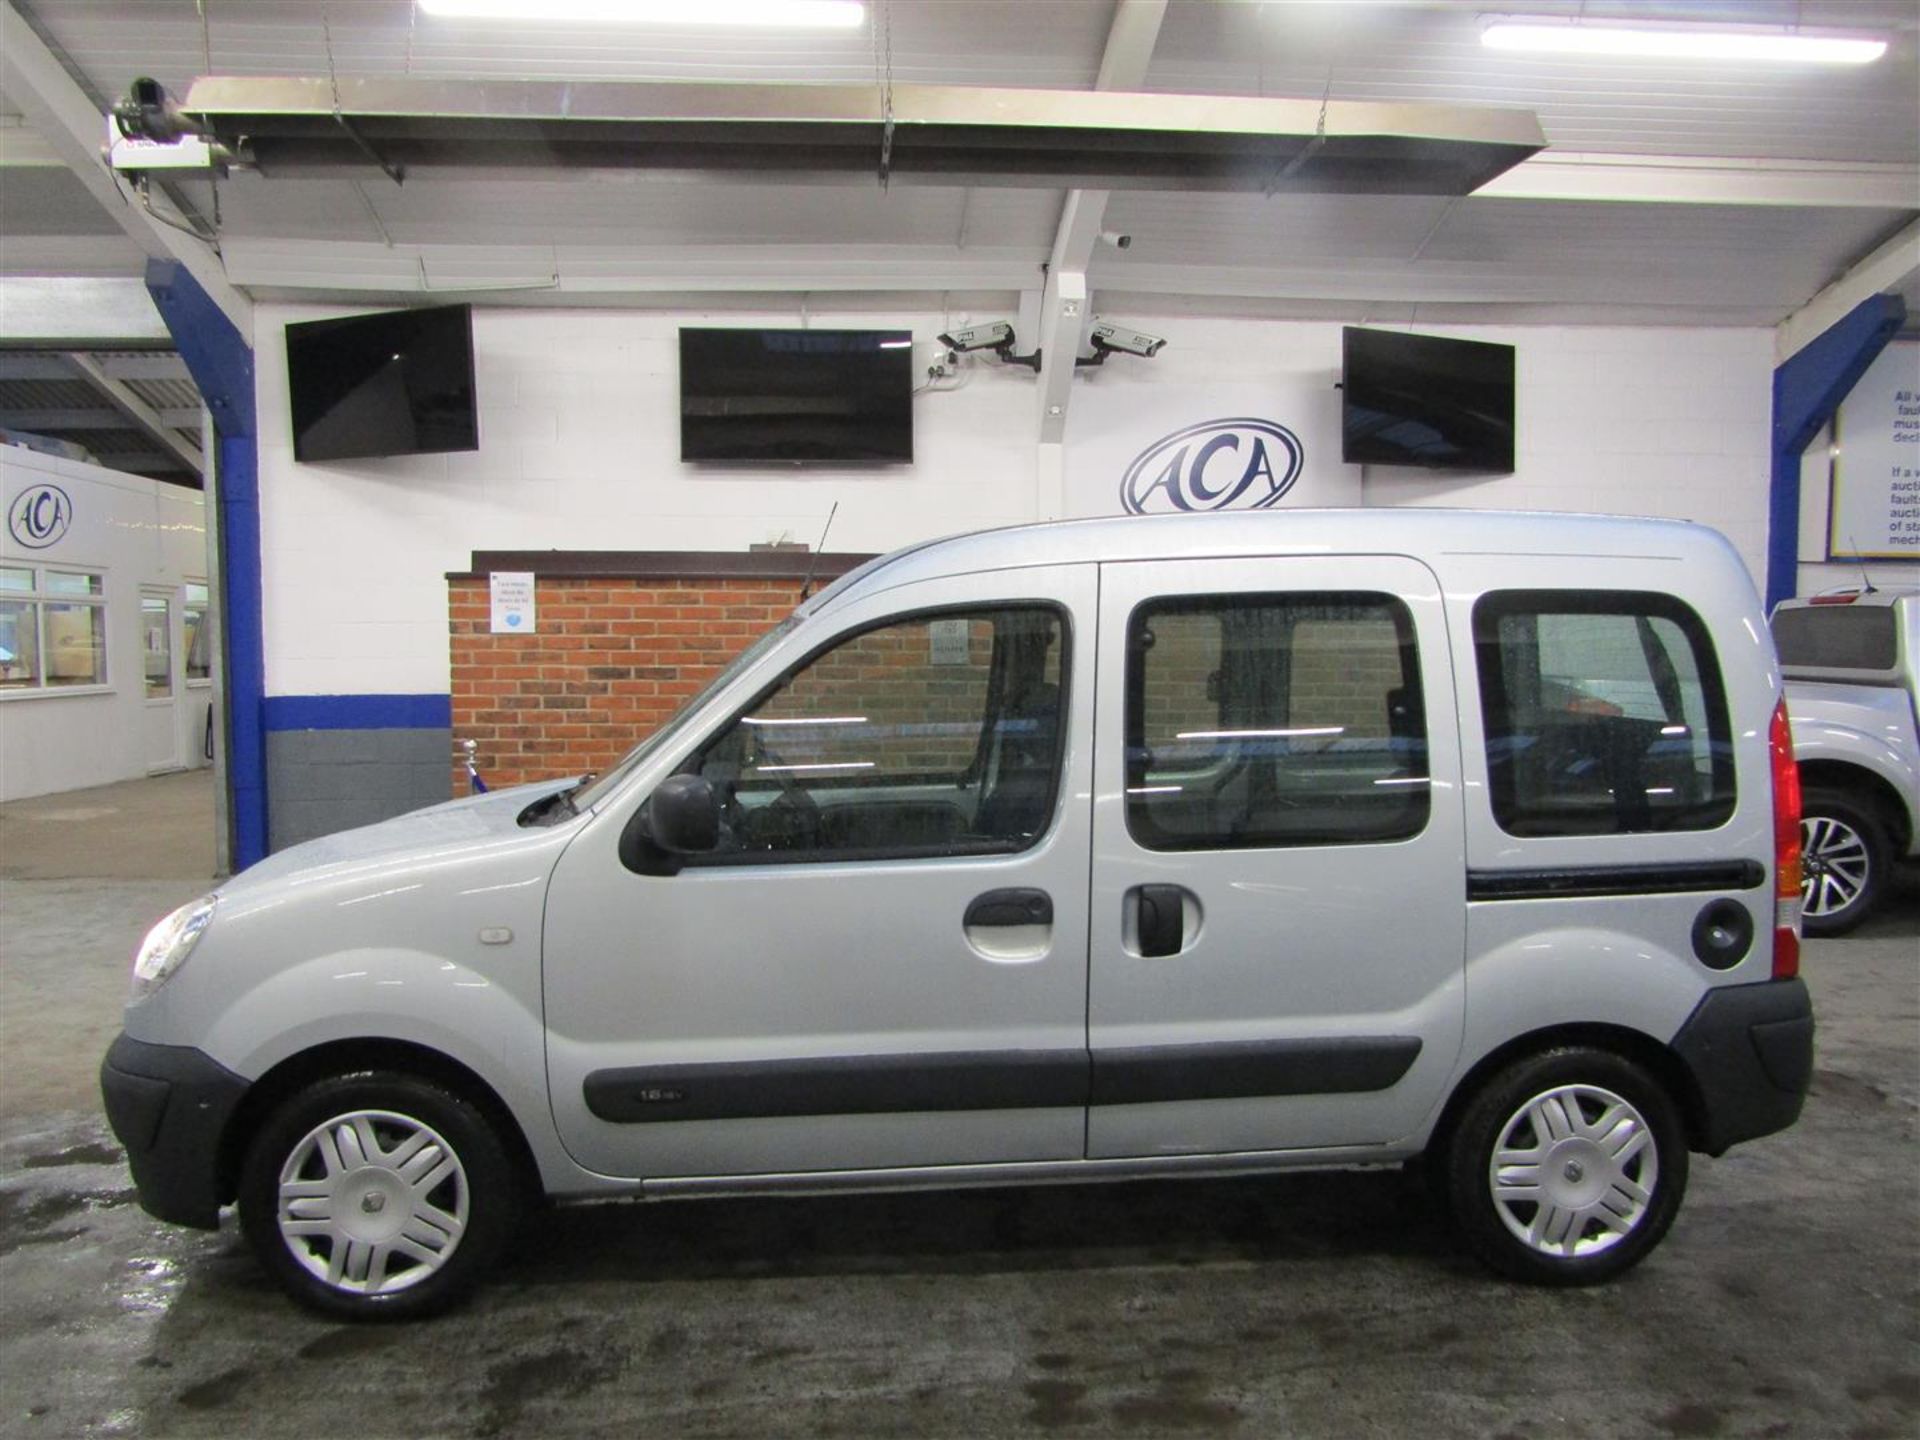 08 08 Renault Kangoo Authentique A - Image 2 of 28